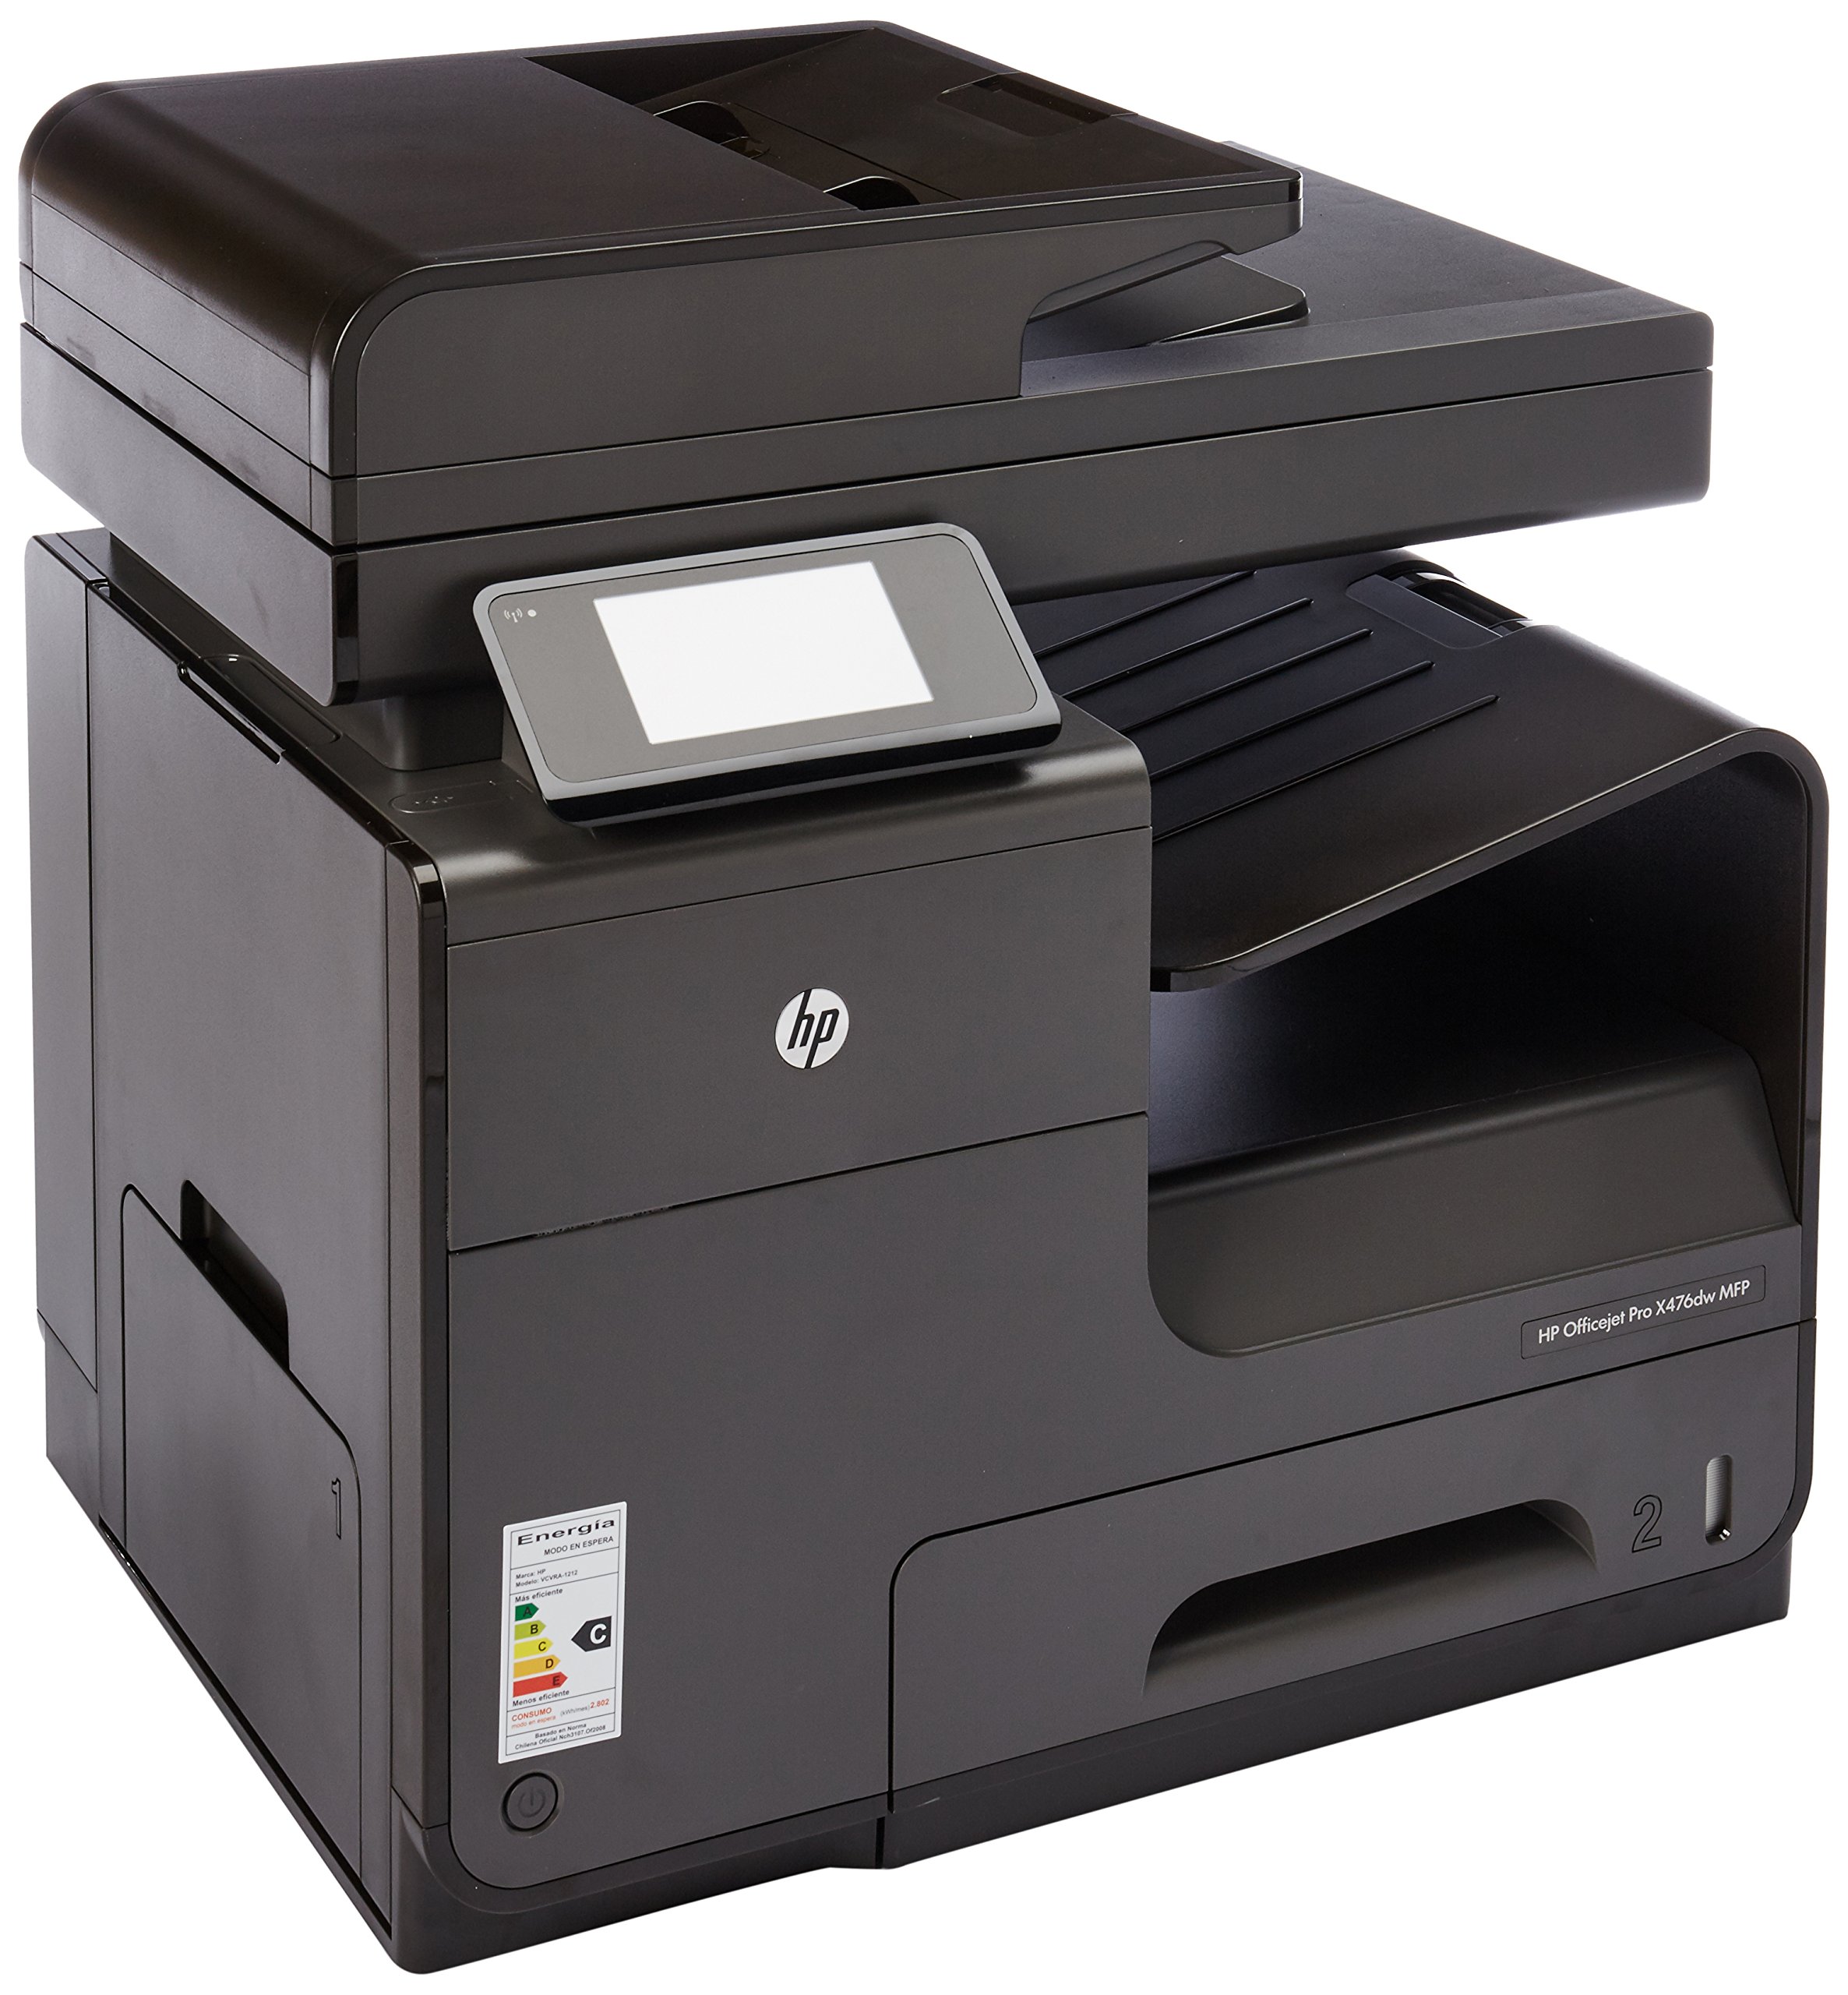 HP Printer network configuration page